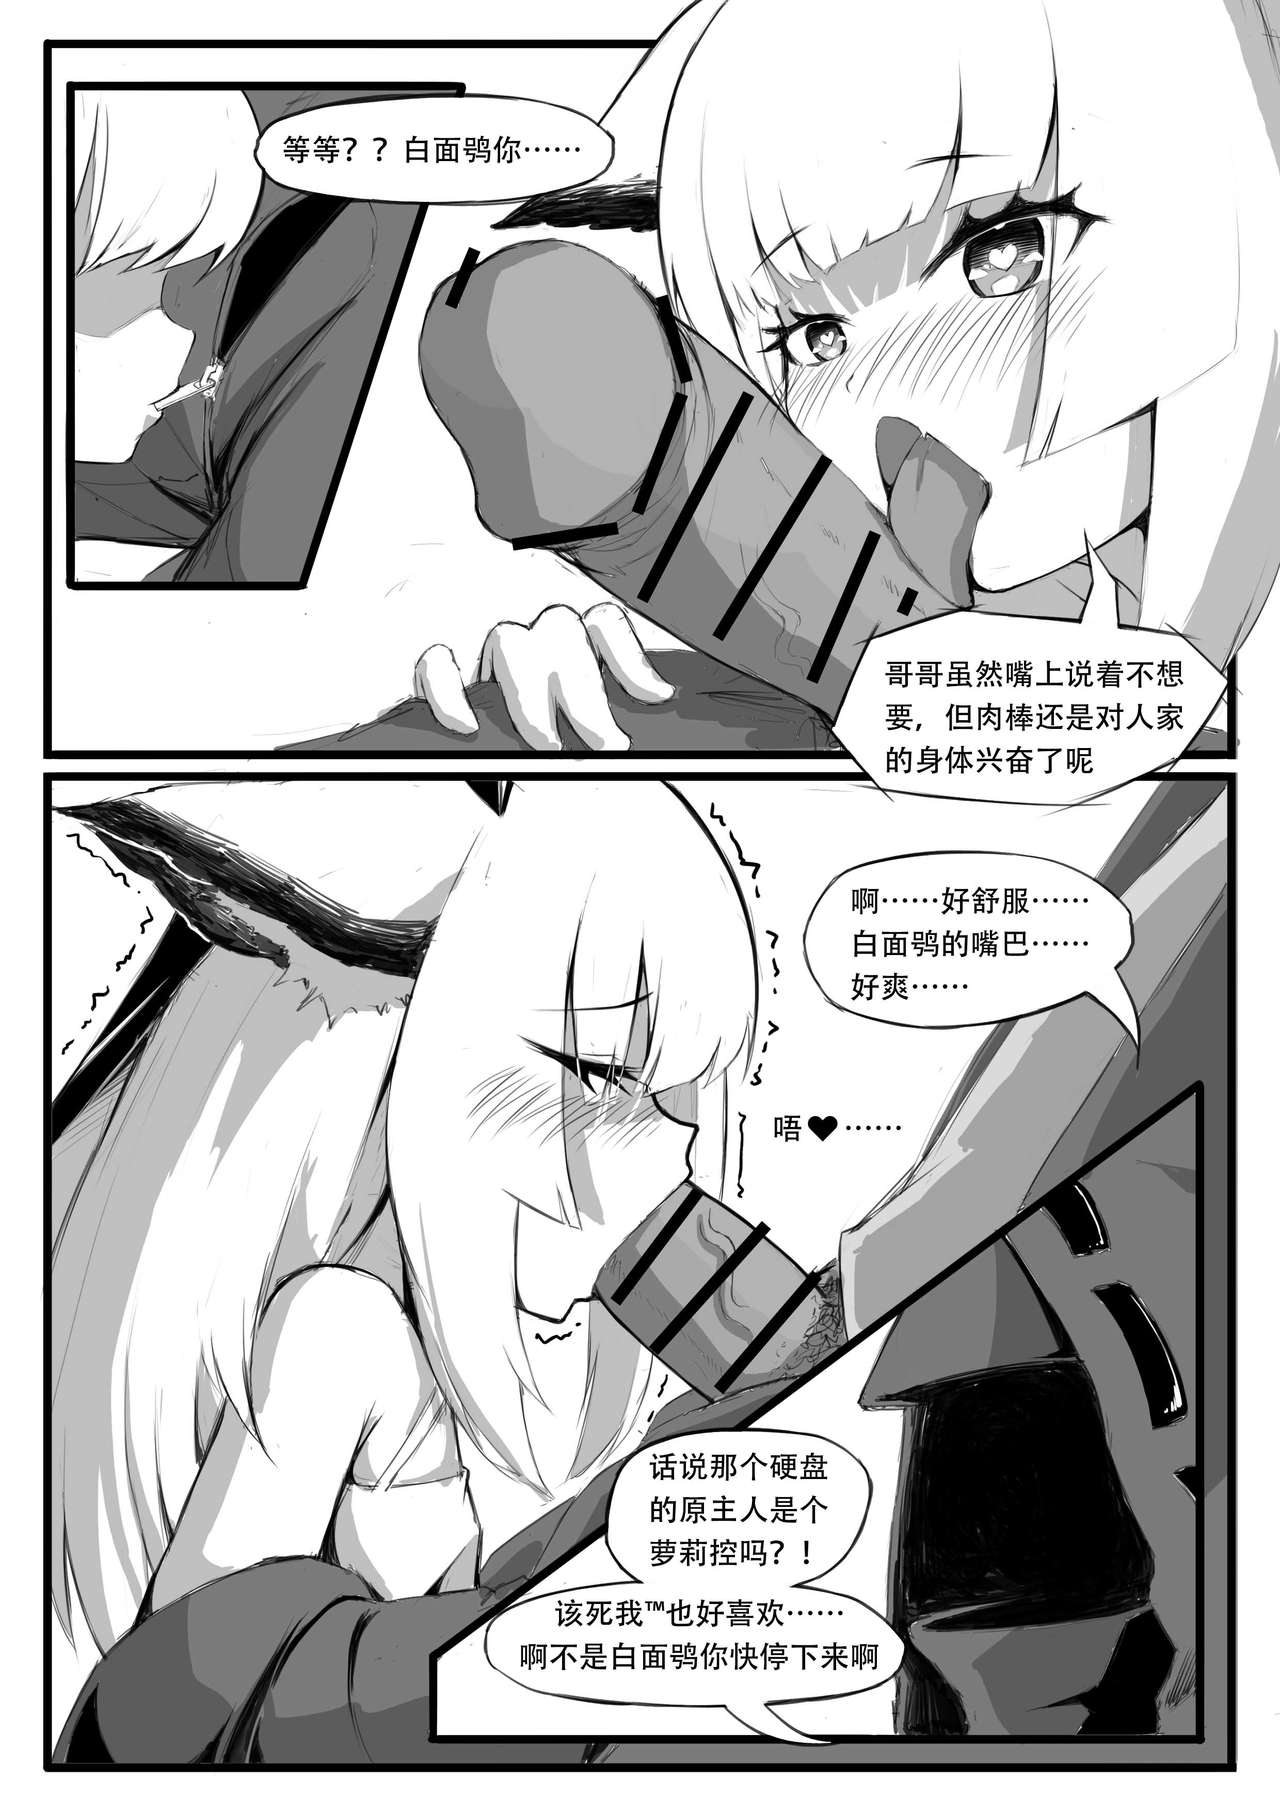 [saluky] 关于白面鸮变成了幼女这件事 (Arknights) [Chinese] page 12 full